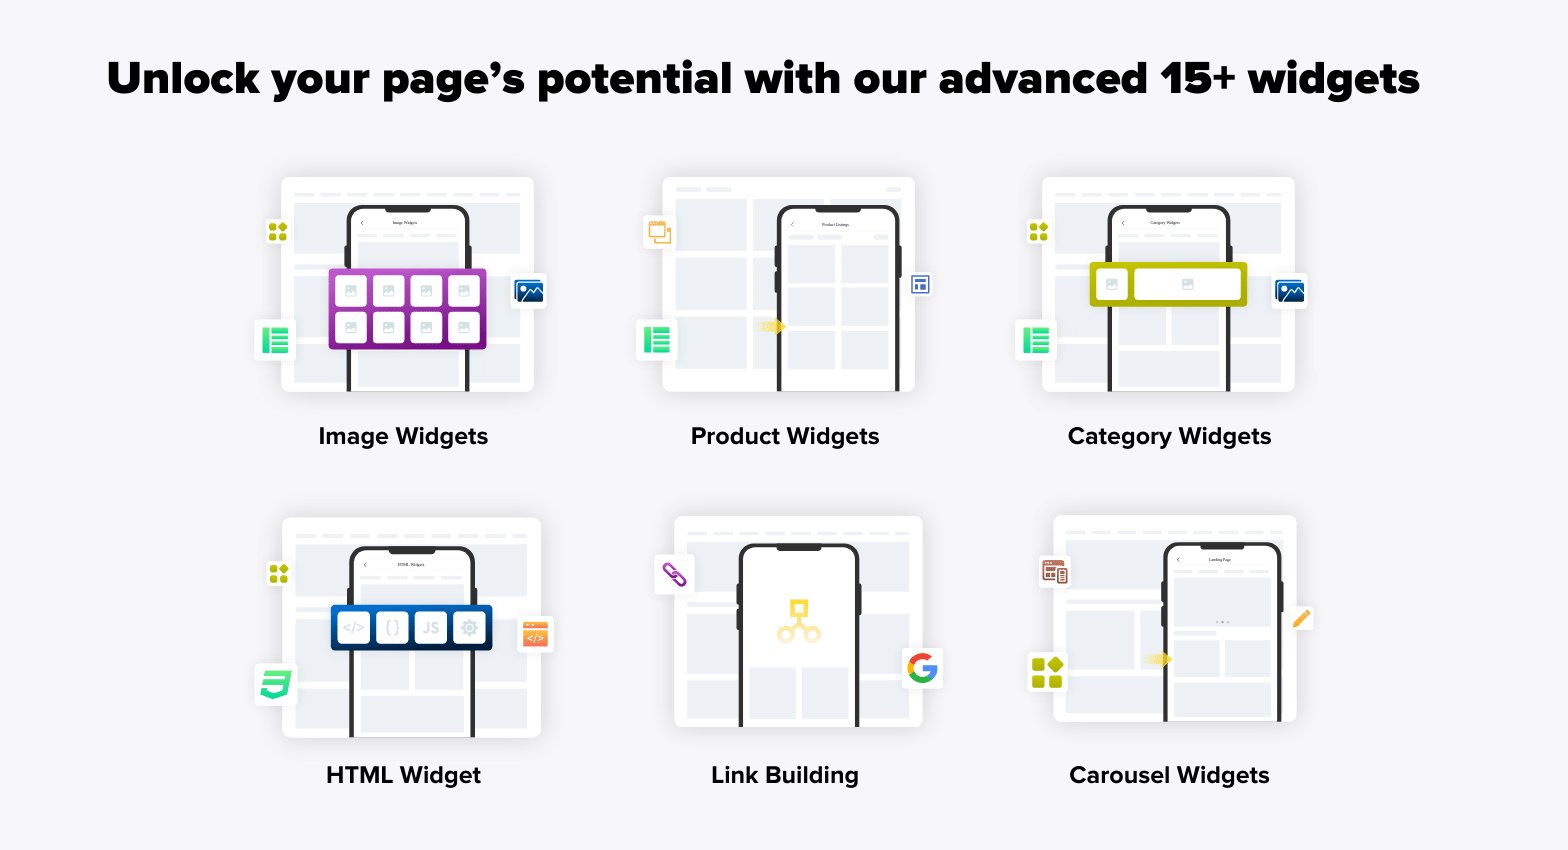 Advanced widgets to unlock the pages